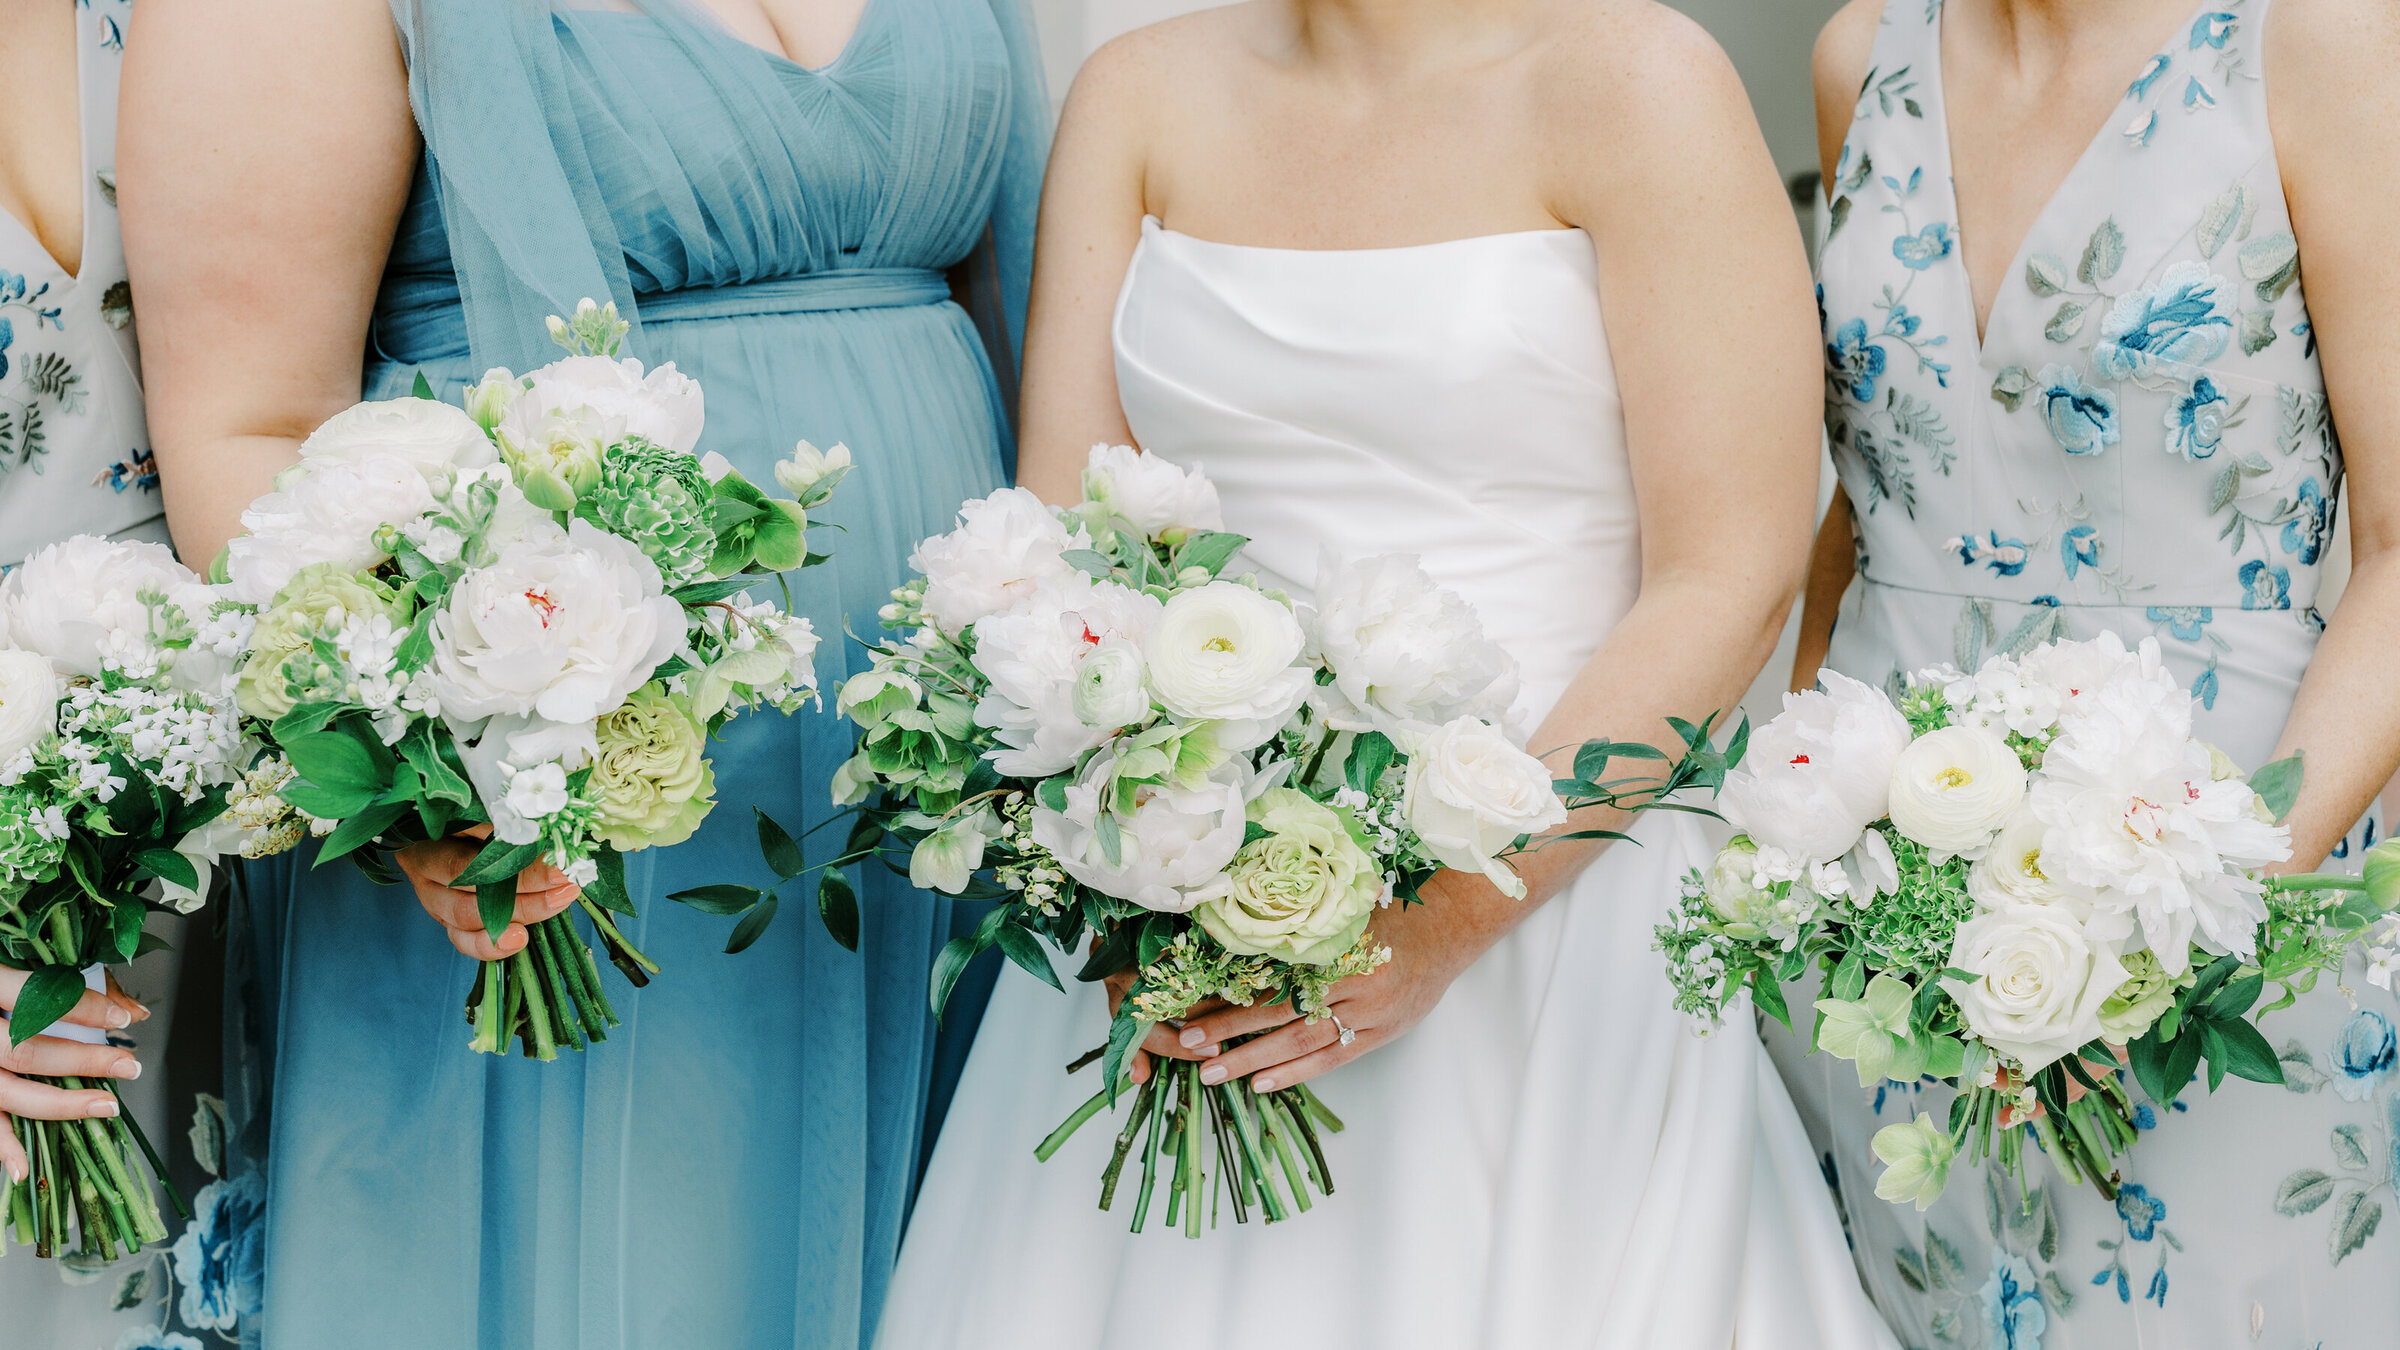 Bridesmaids in blue and green floral dresses and bride in white strapless dress holding bouquets with white ranunculus